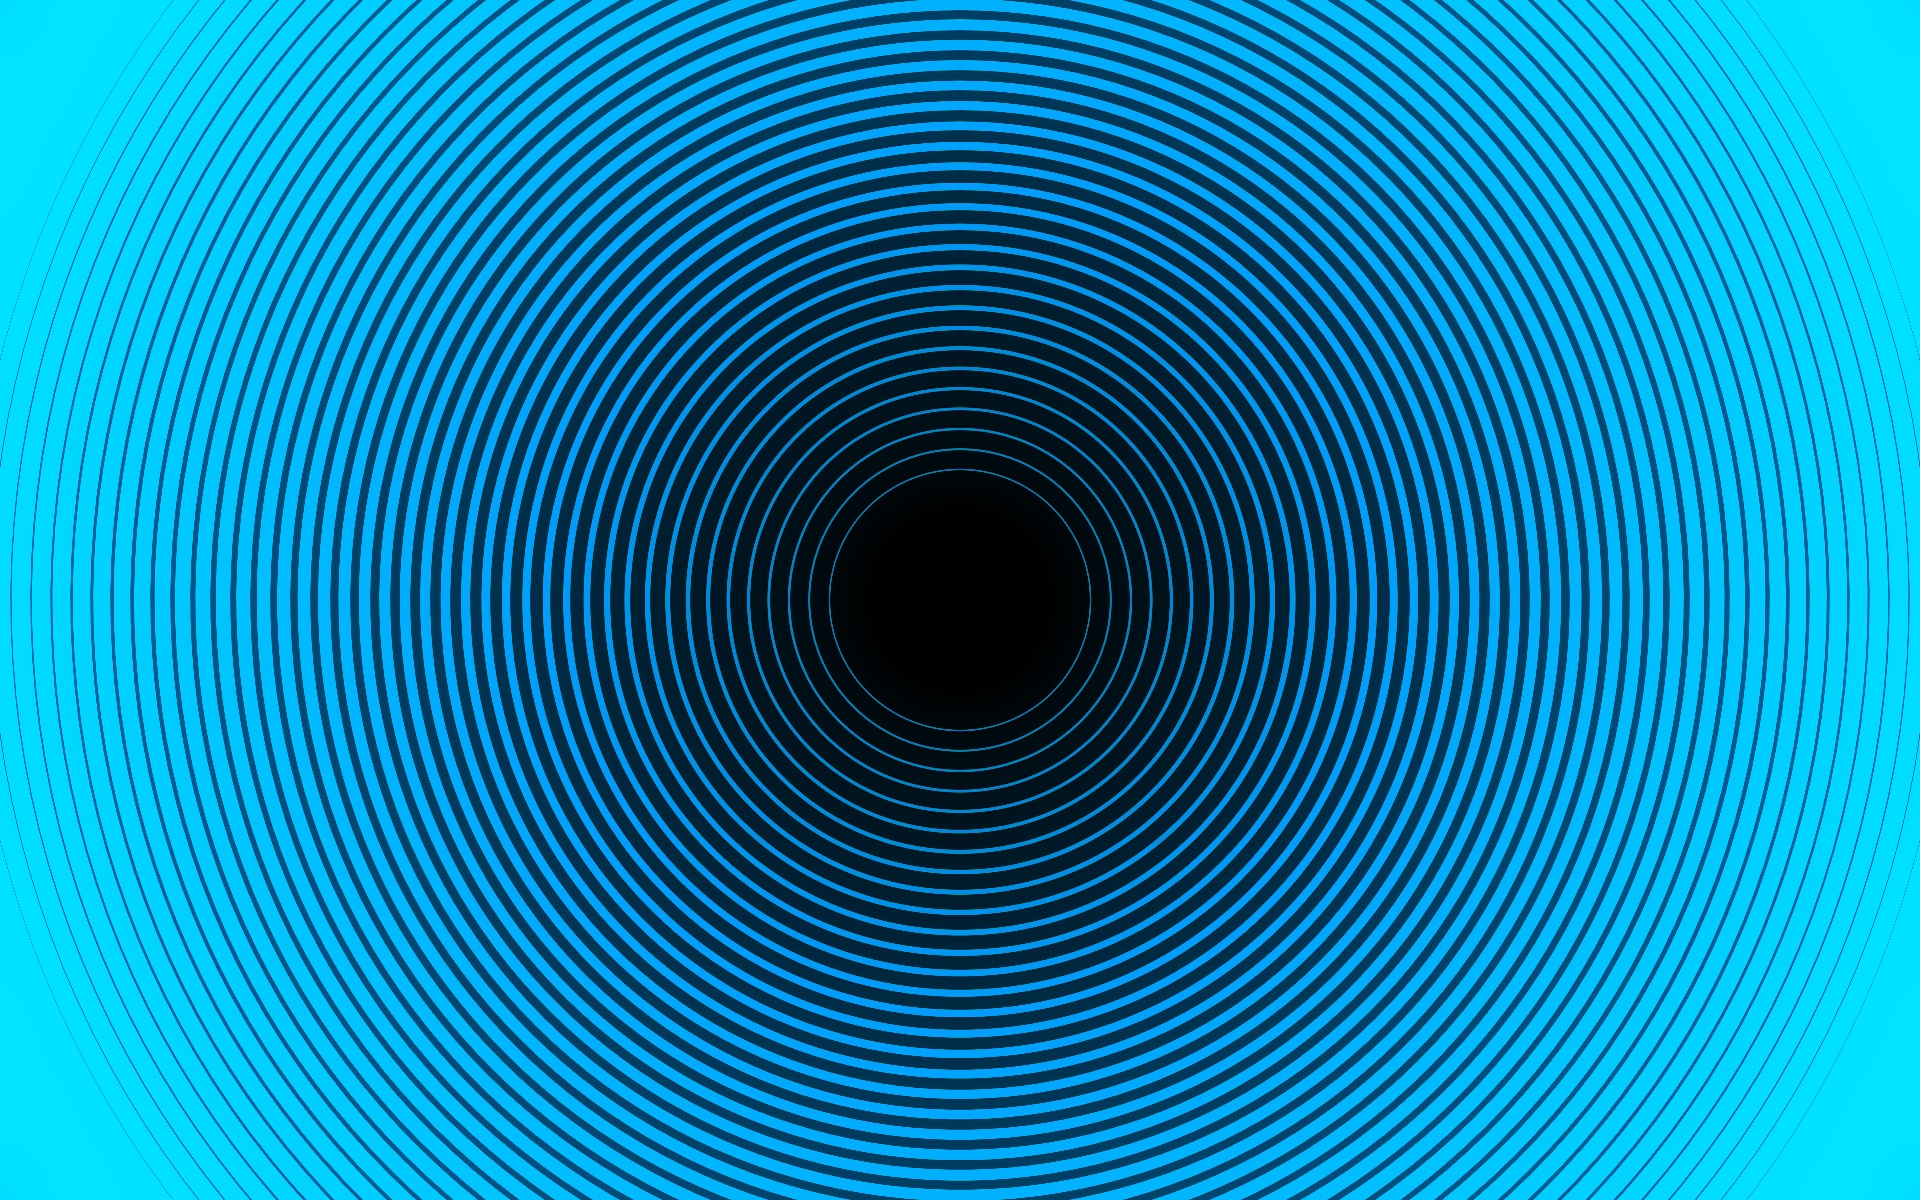 optical illusion iphone wallpapers